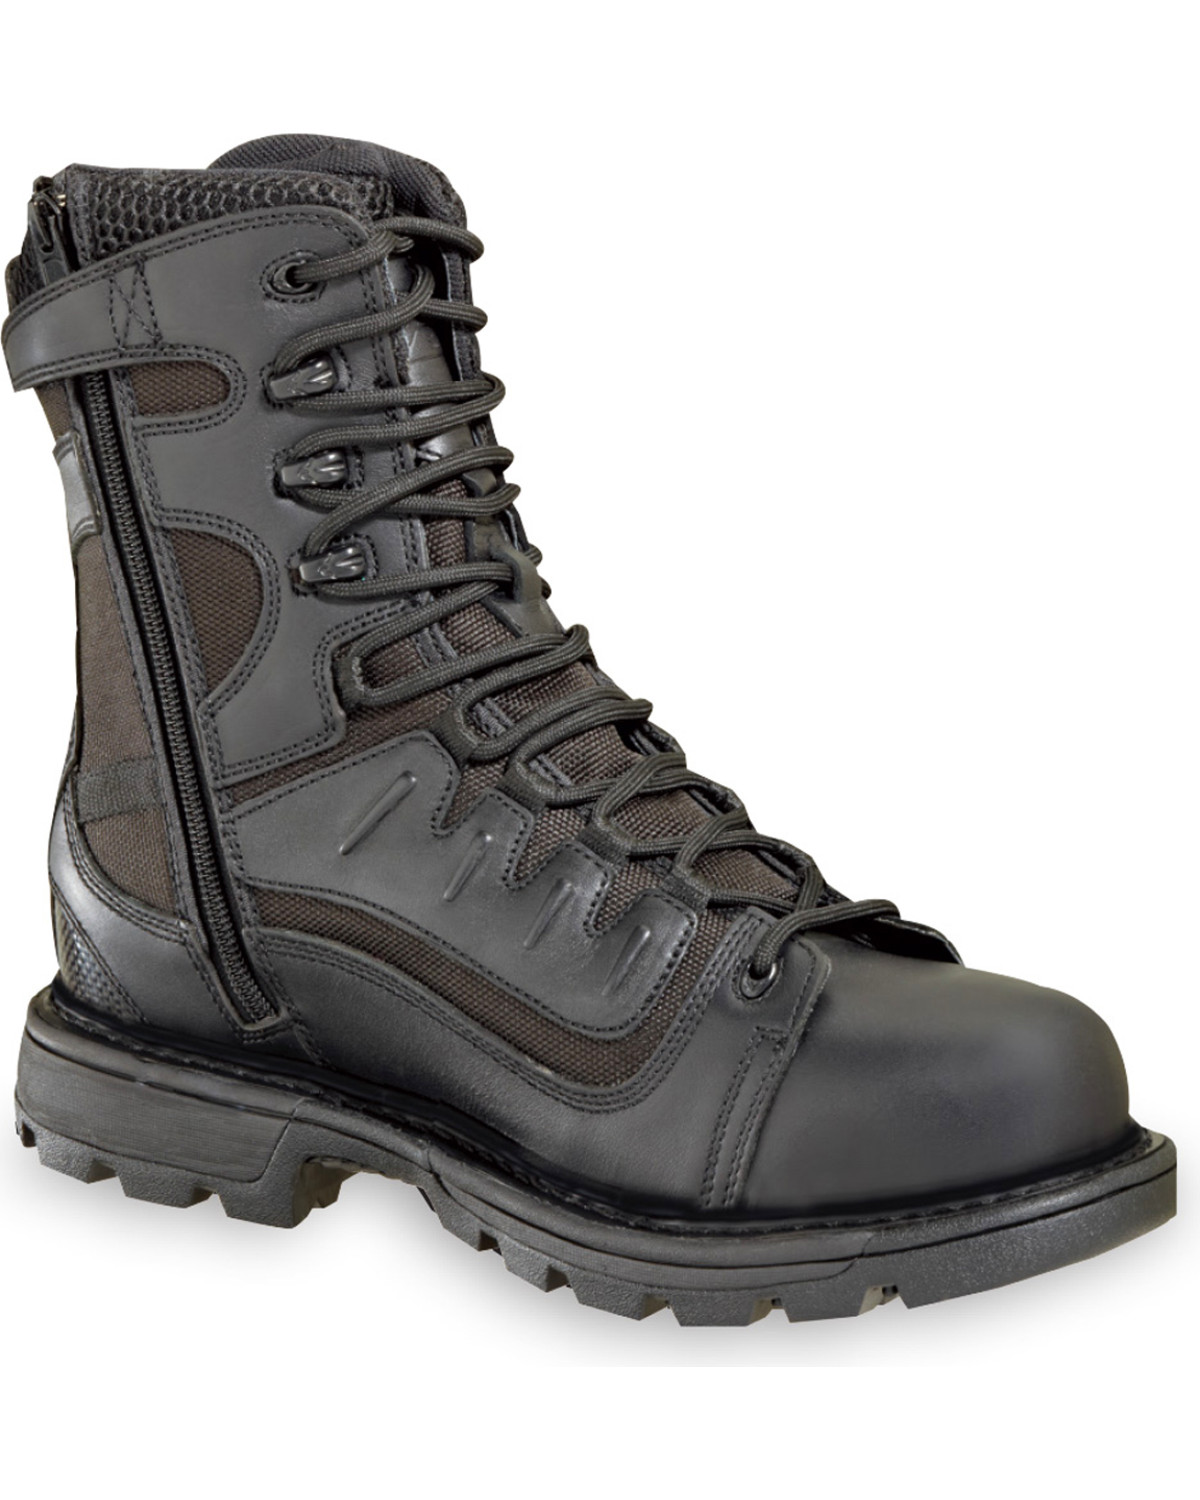 mens tactical waterproof boots free 